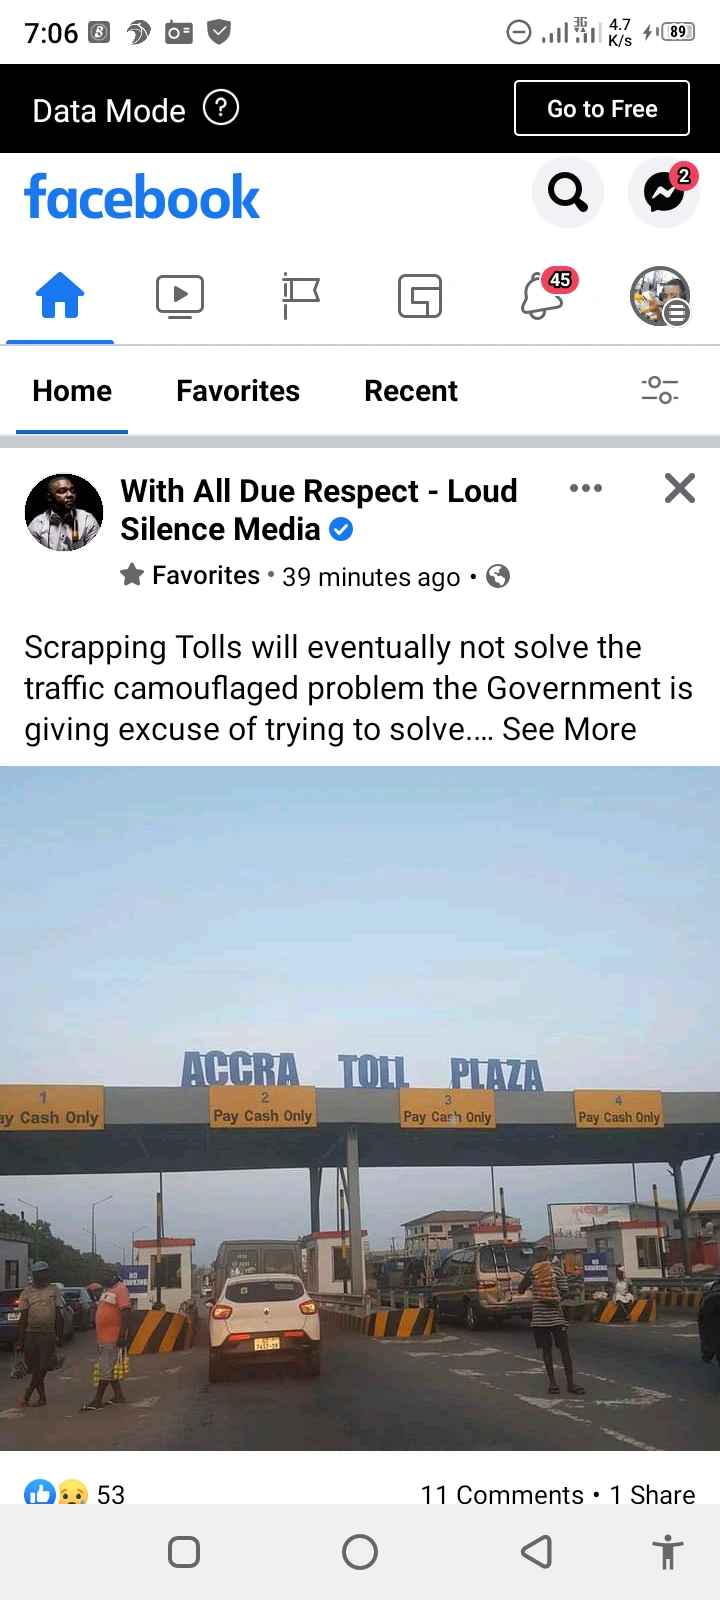 Kevin Taylor Give Reasons Why Scrapping Tolls Is Not Good For Ghana 1